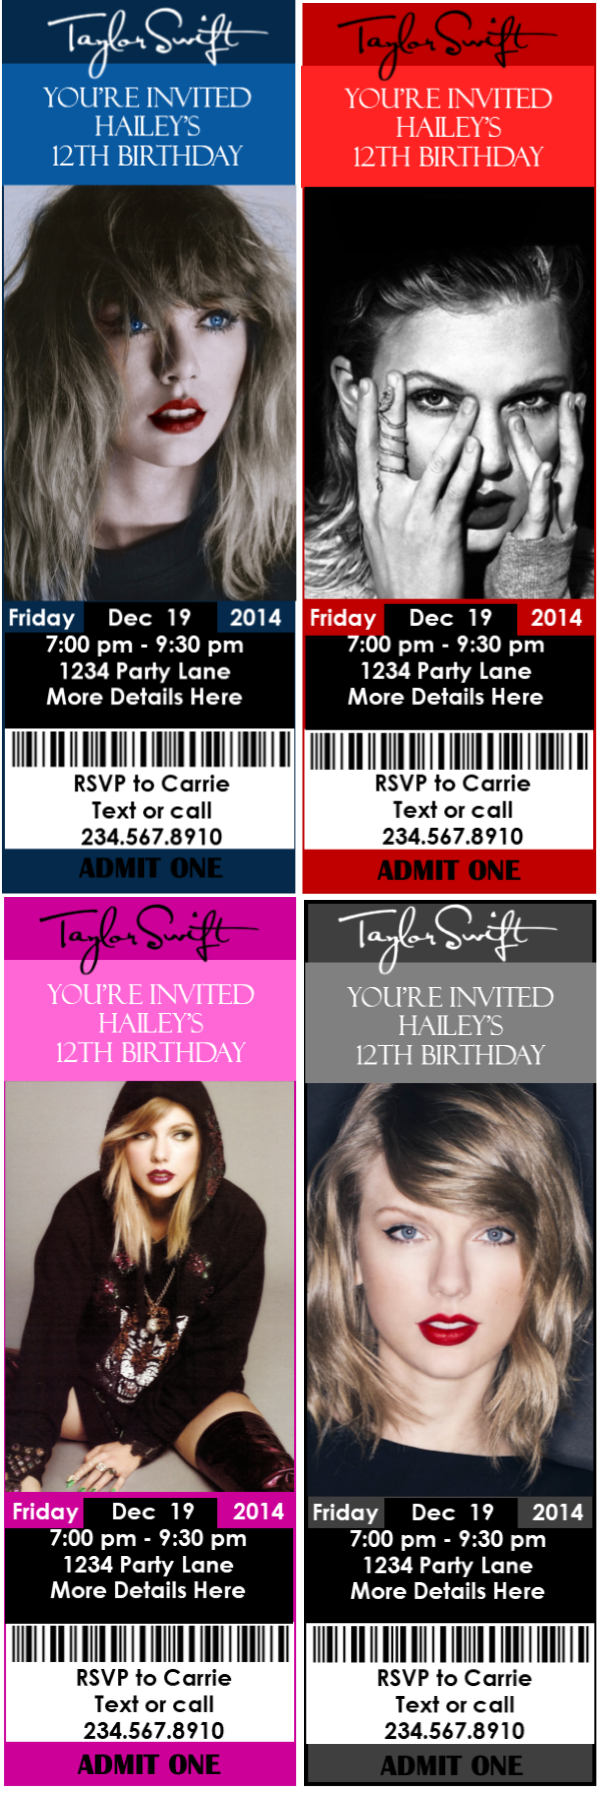 Bachelorette Party Games, T Swift … curated on LTK